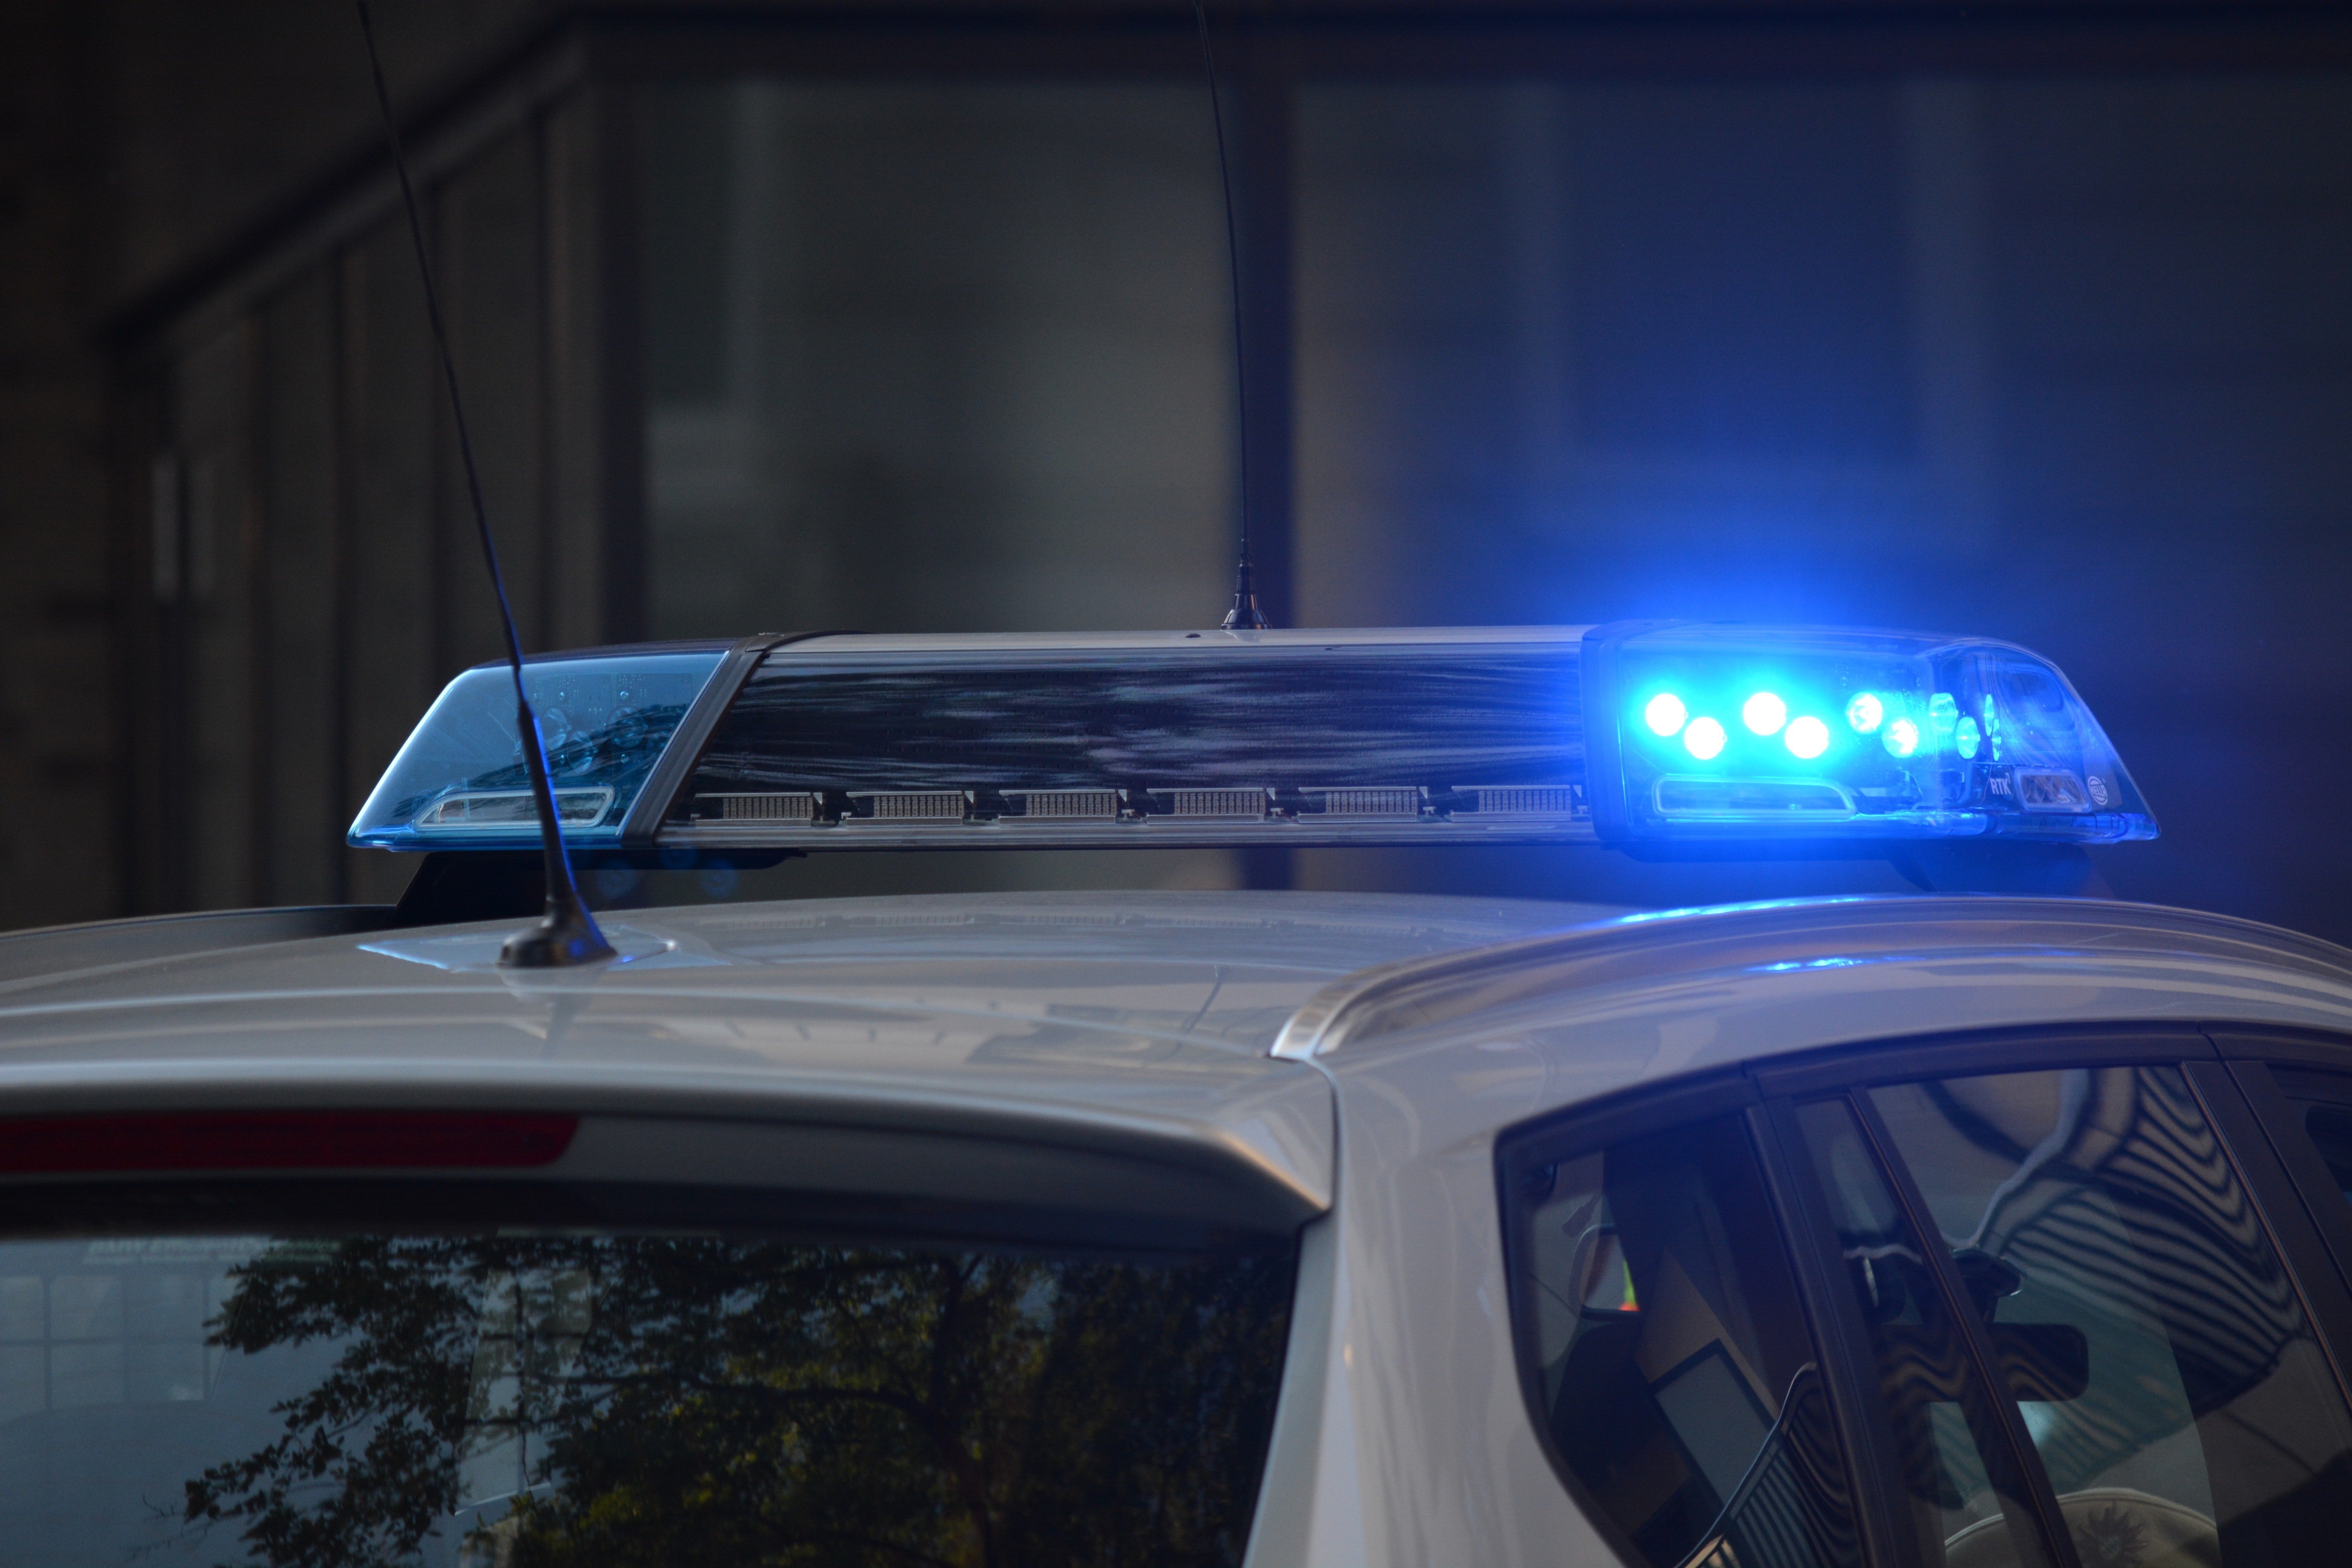 A police car with sirens on. | Photo: Pexels